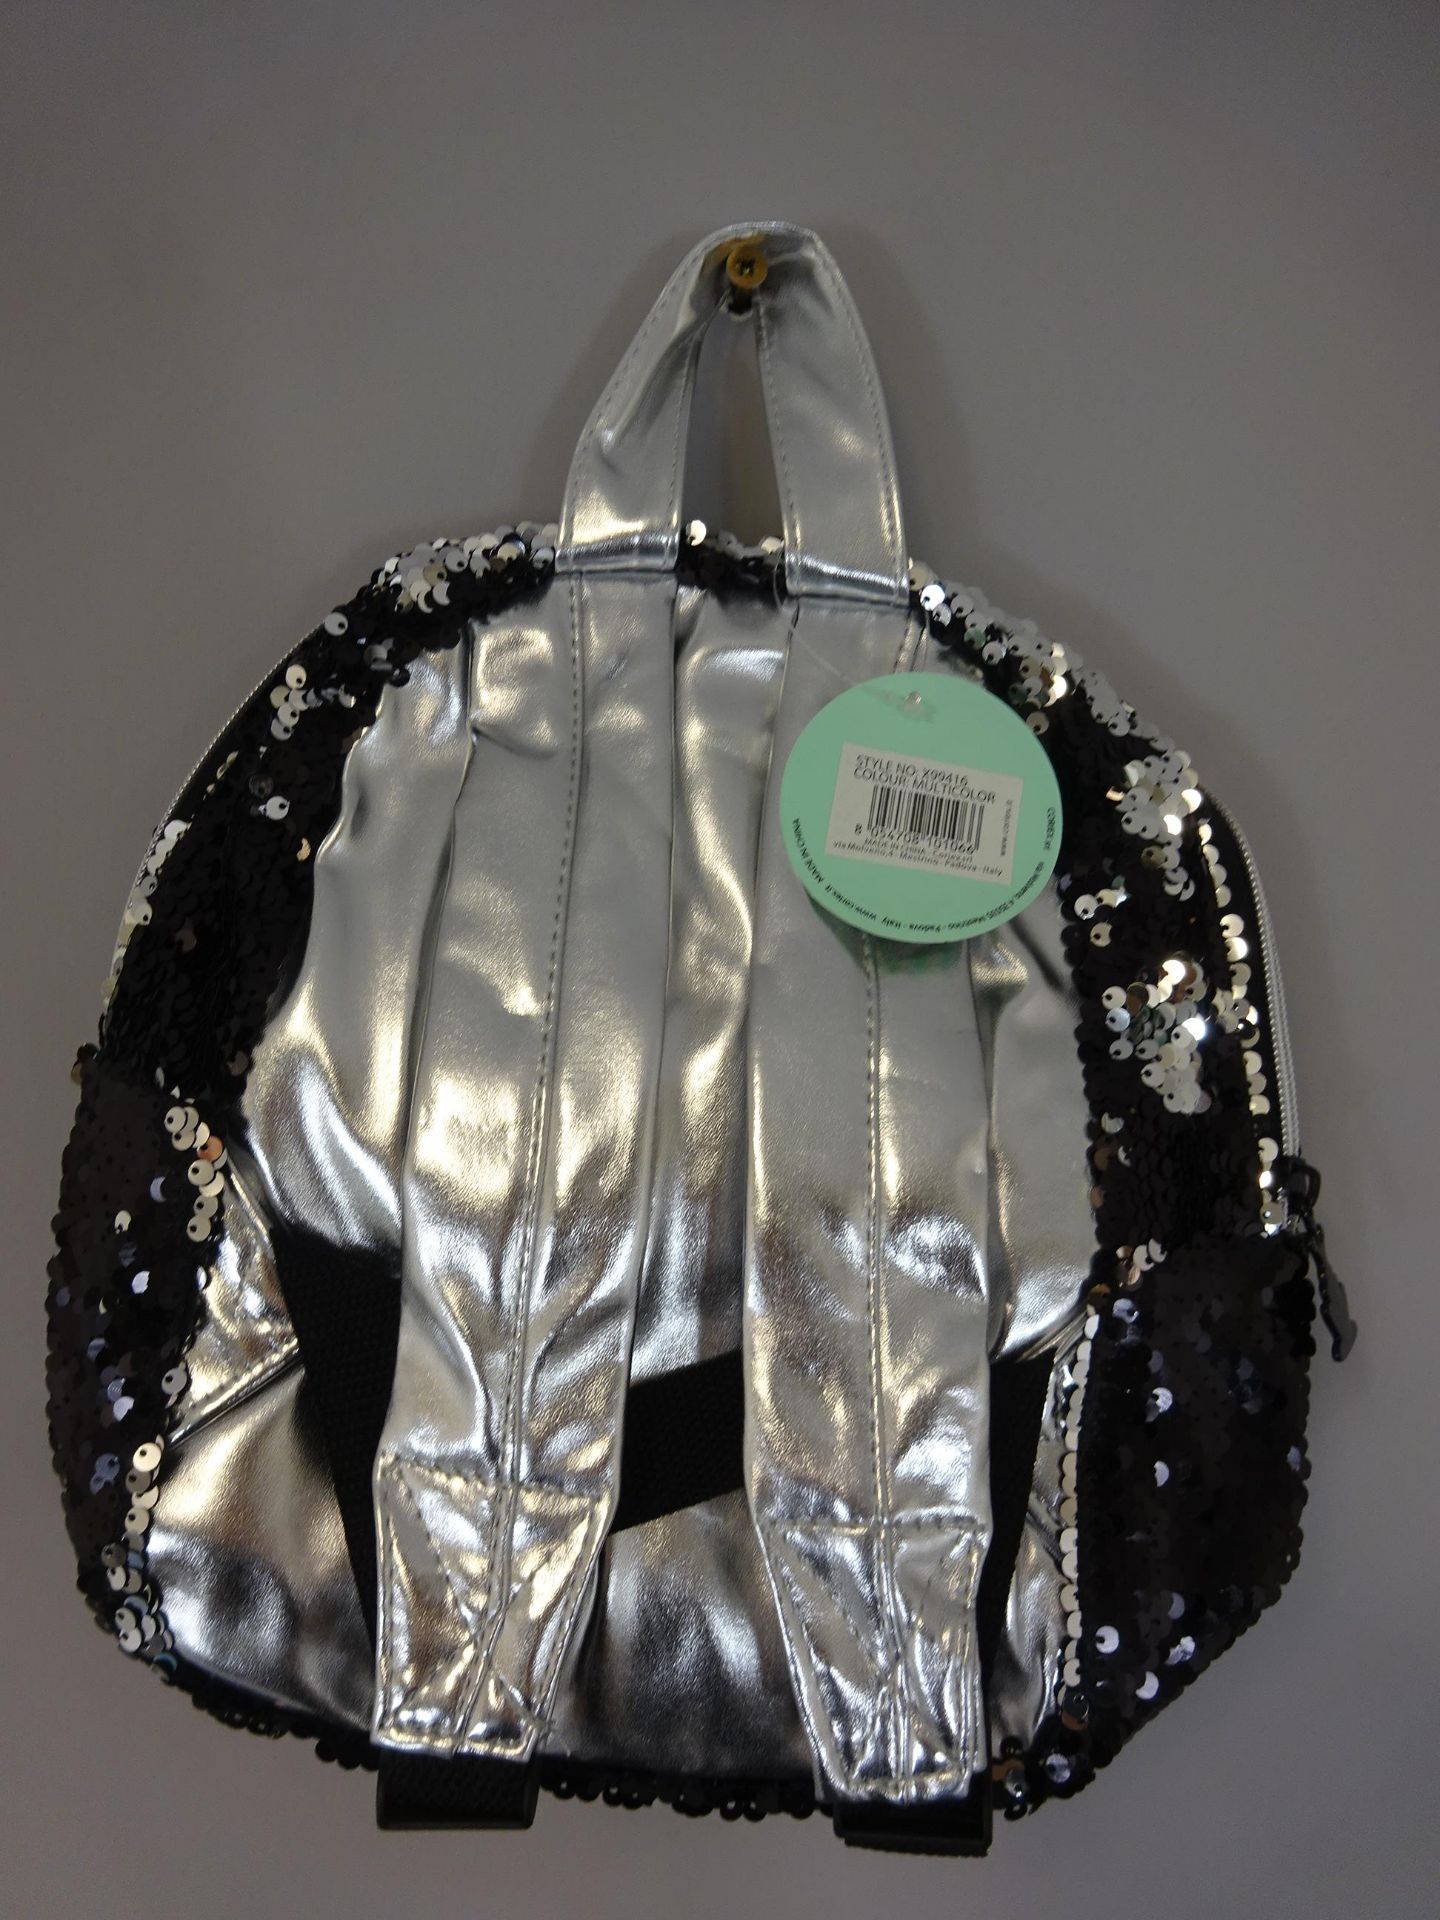 New Black & Silver Sequined Kids Backpack - Image 2 of 2